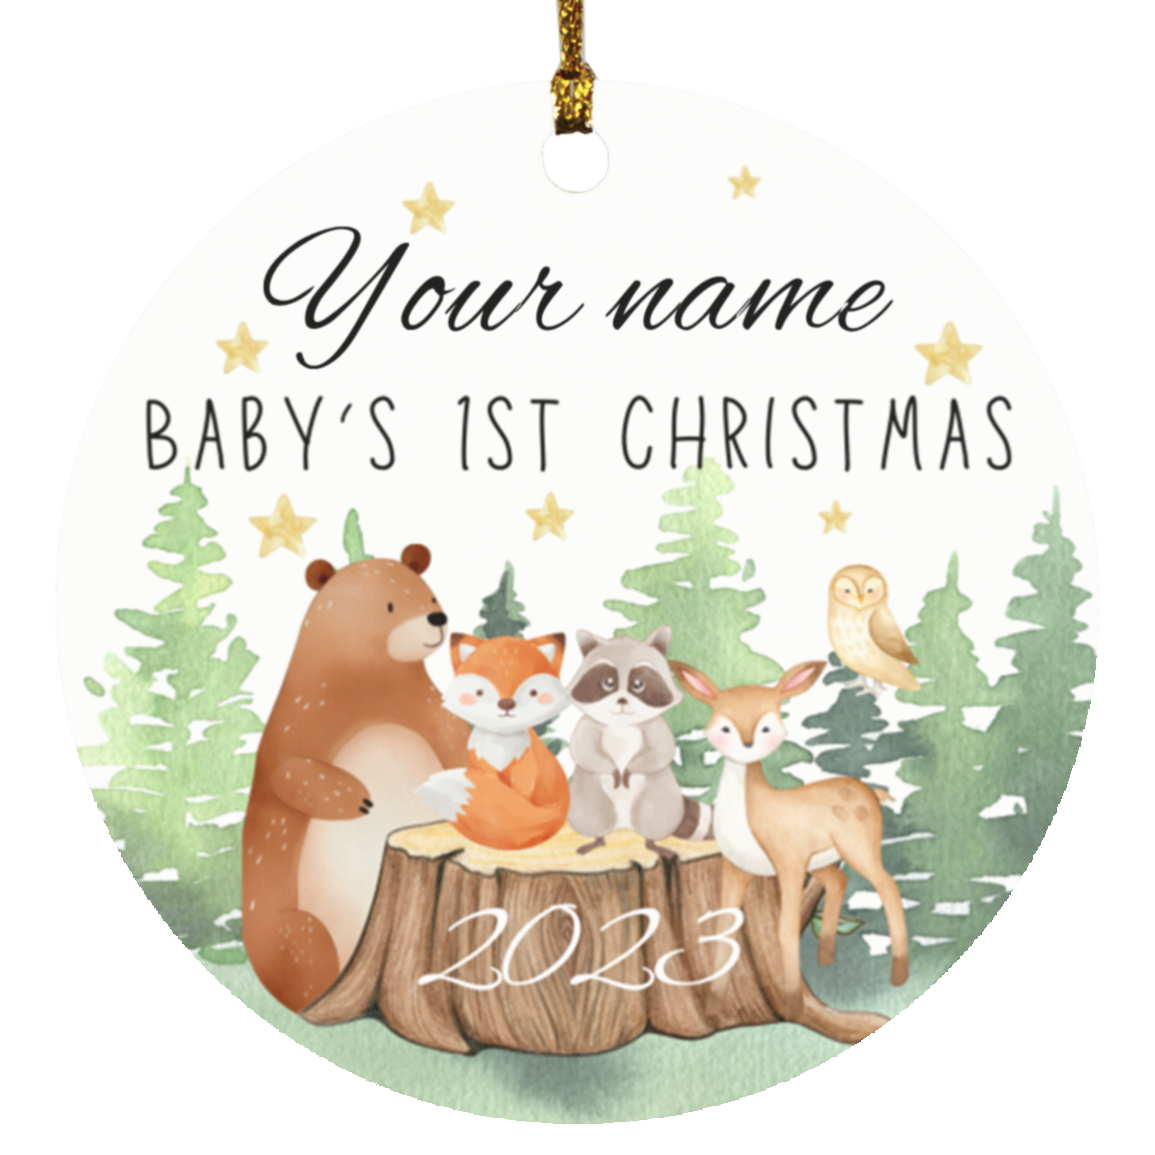 Baby's 1st Christmas Circle Ornament